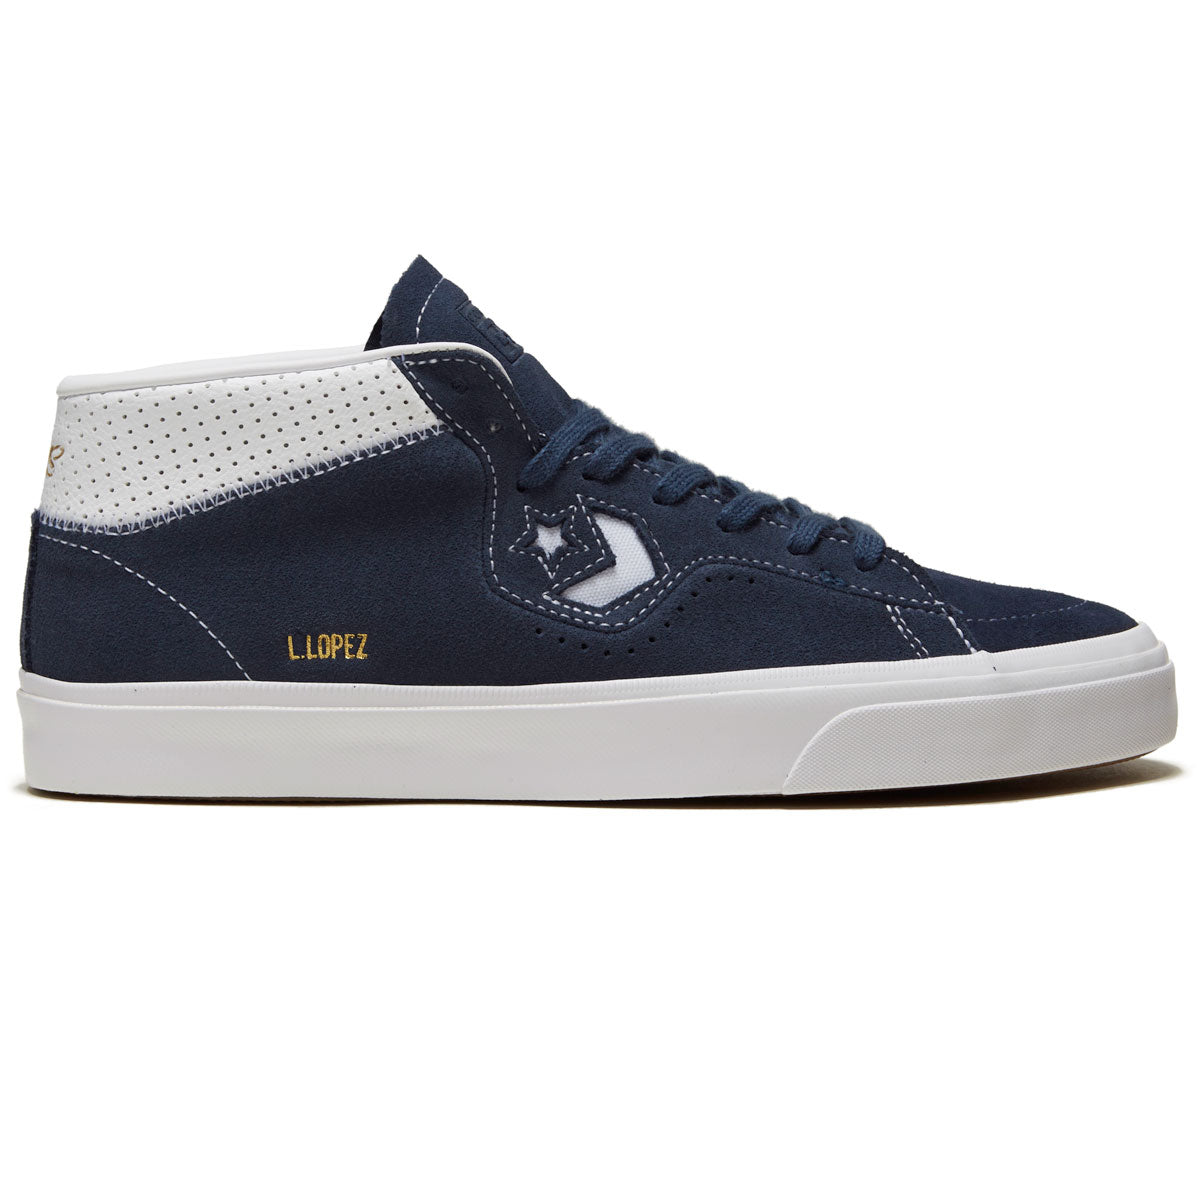 Converse CONS Louie Lopez Pro Mid Navy/White/Navy